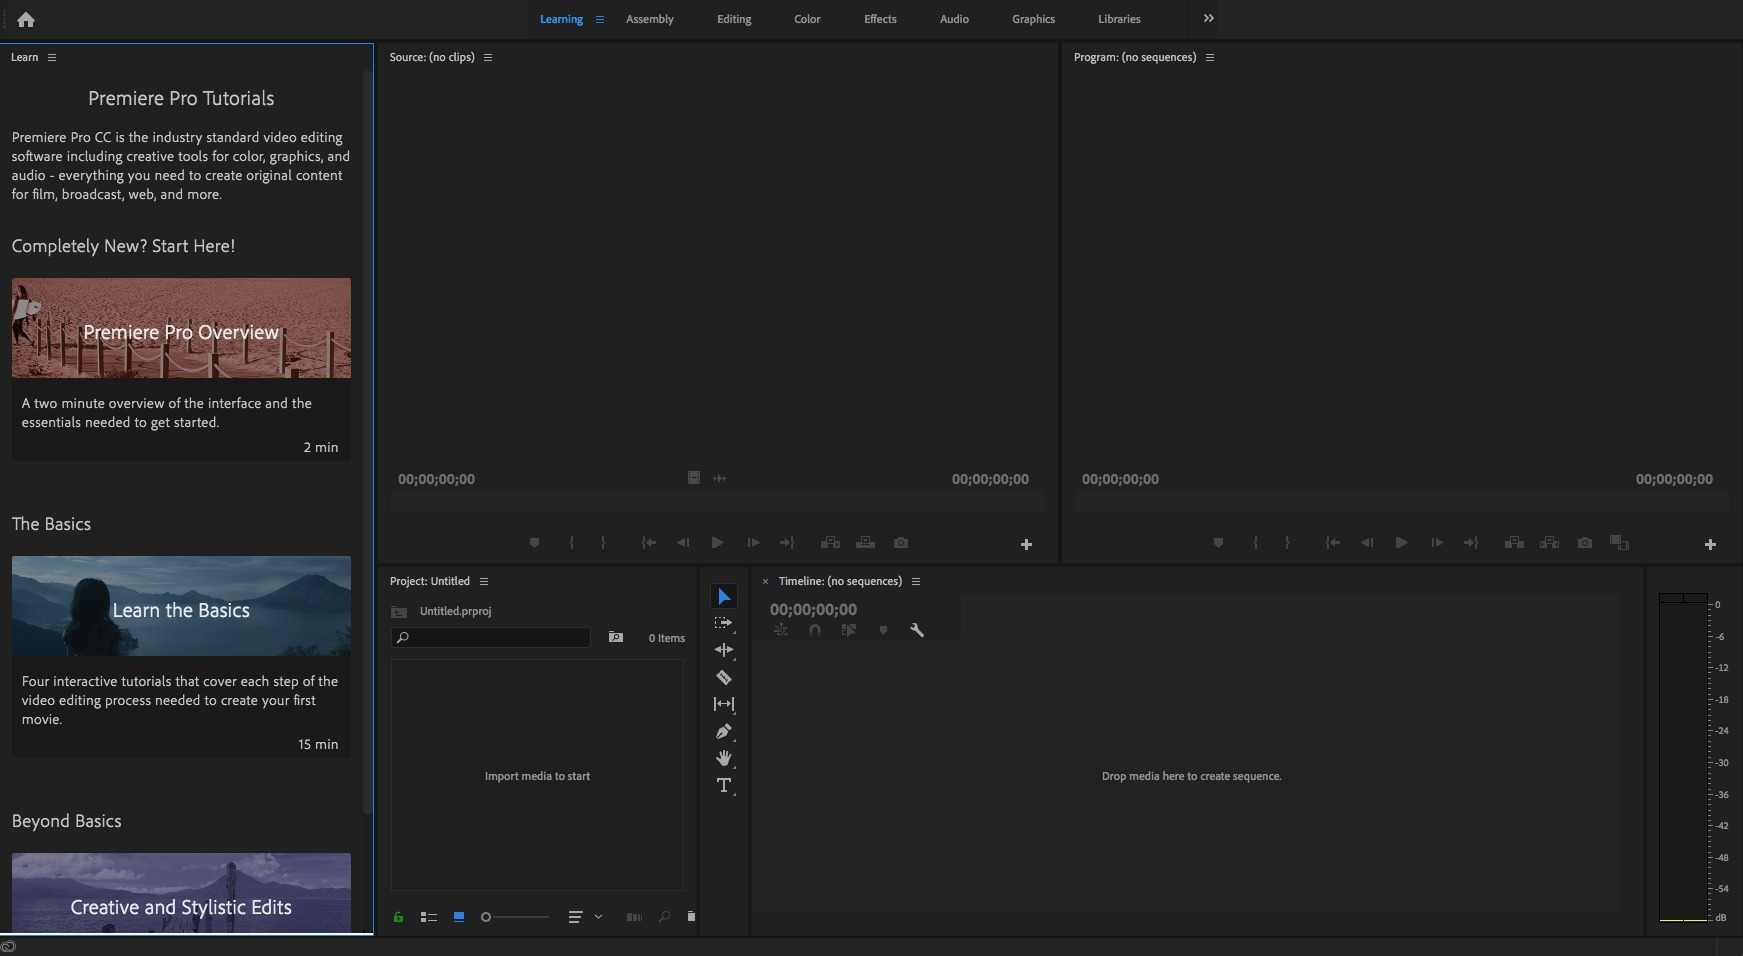 adobe premiere pro transitions pack